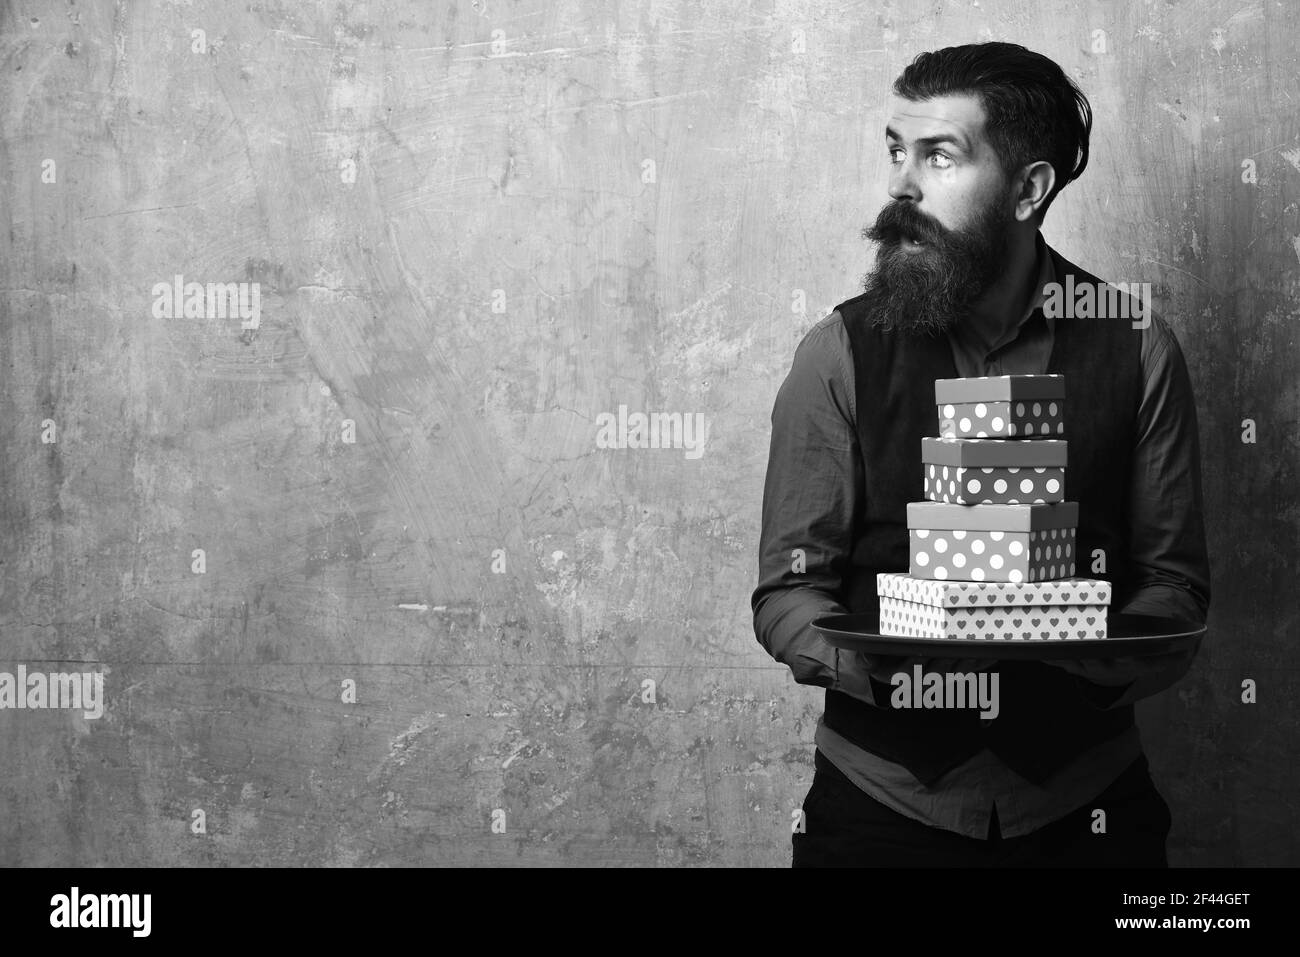 Man with beard holds boxes on beige wall background Stock Photo